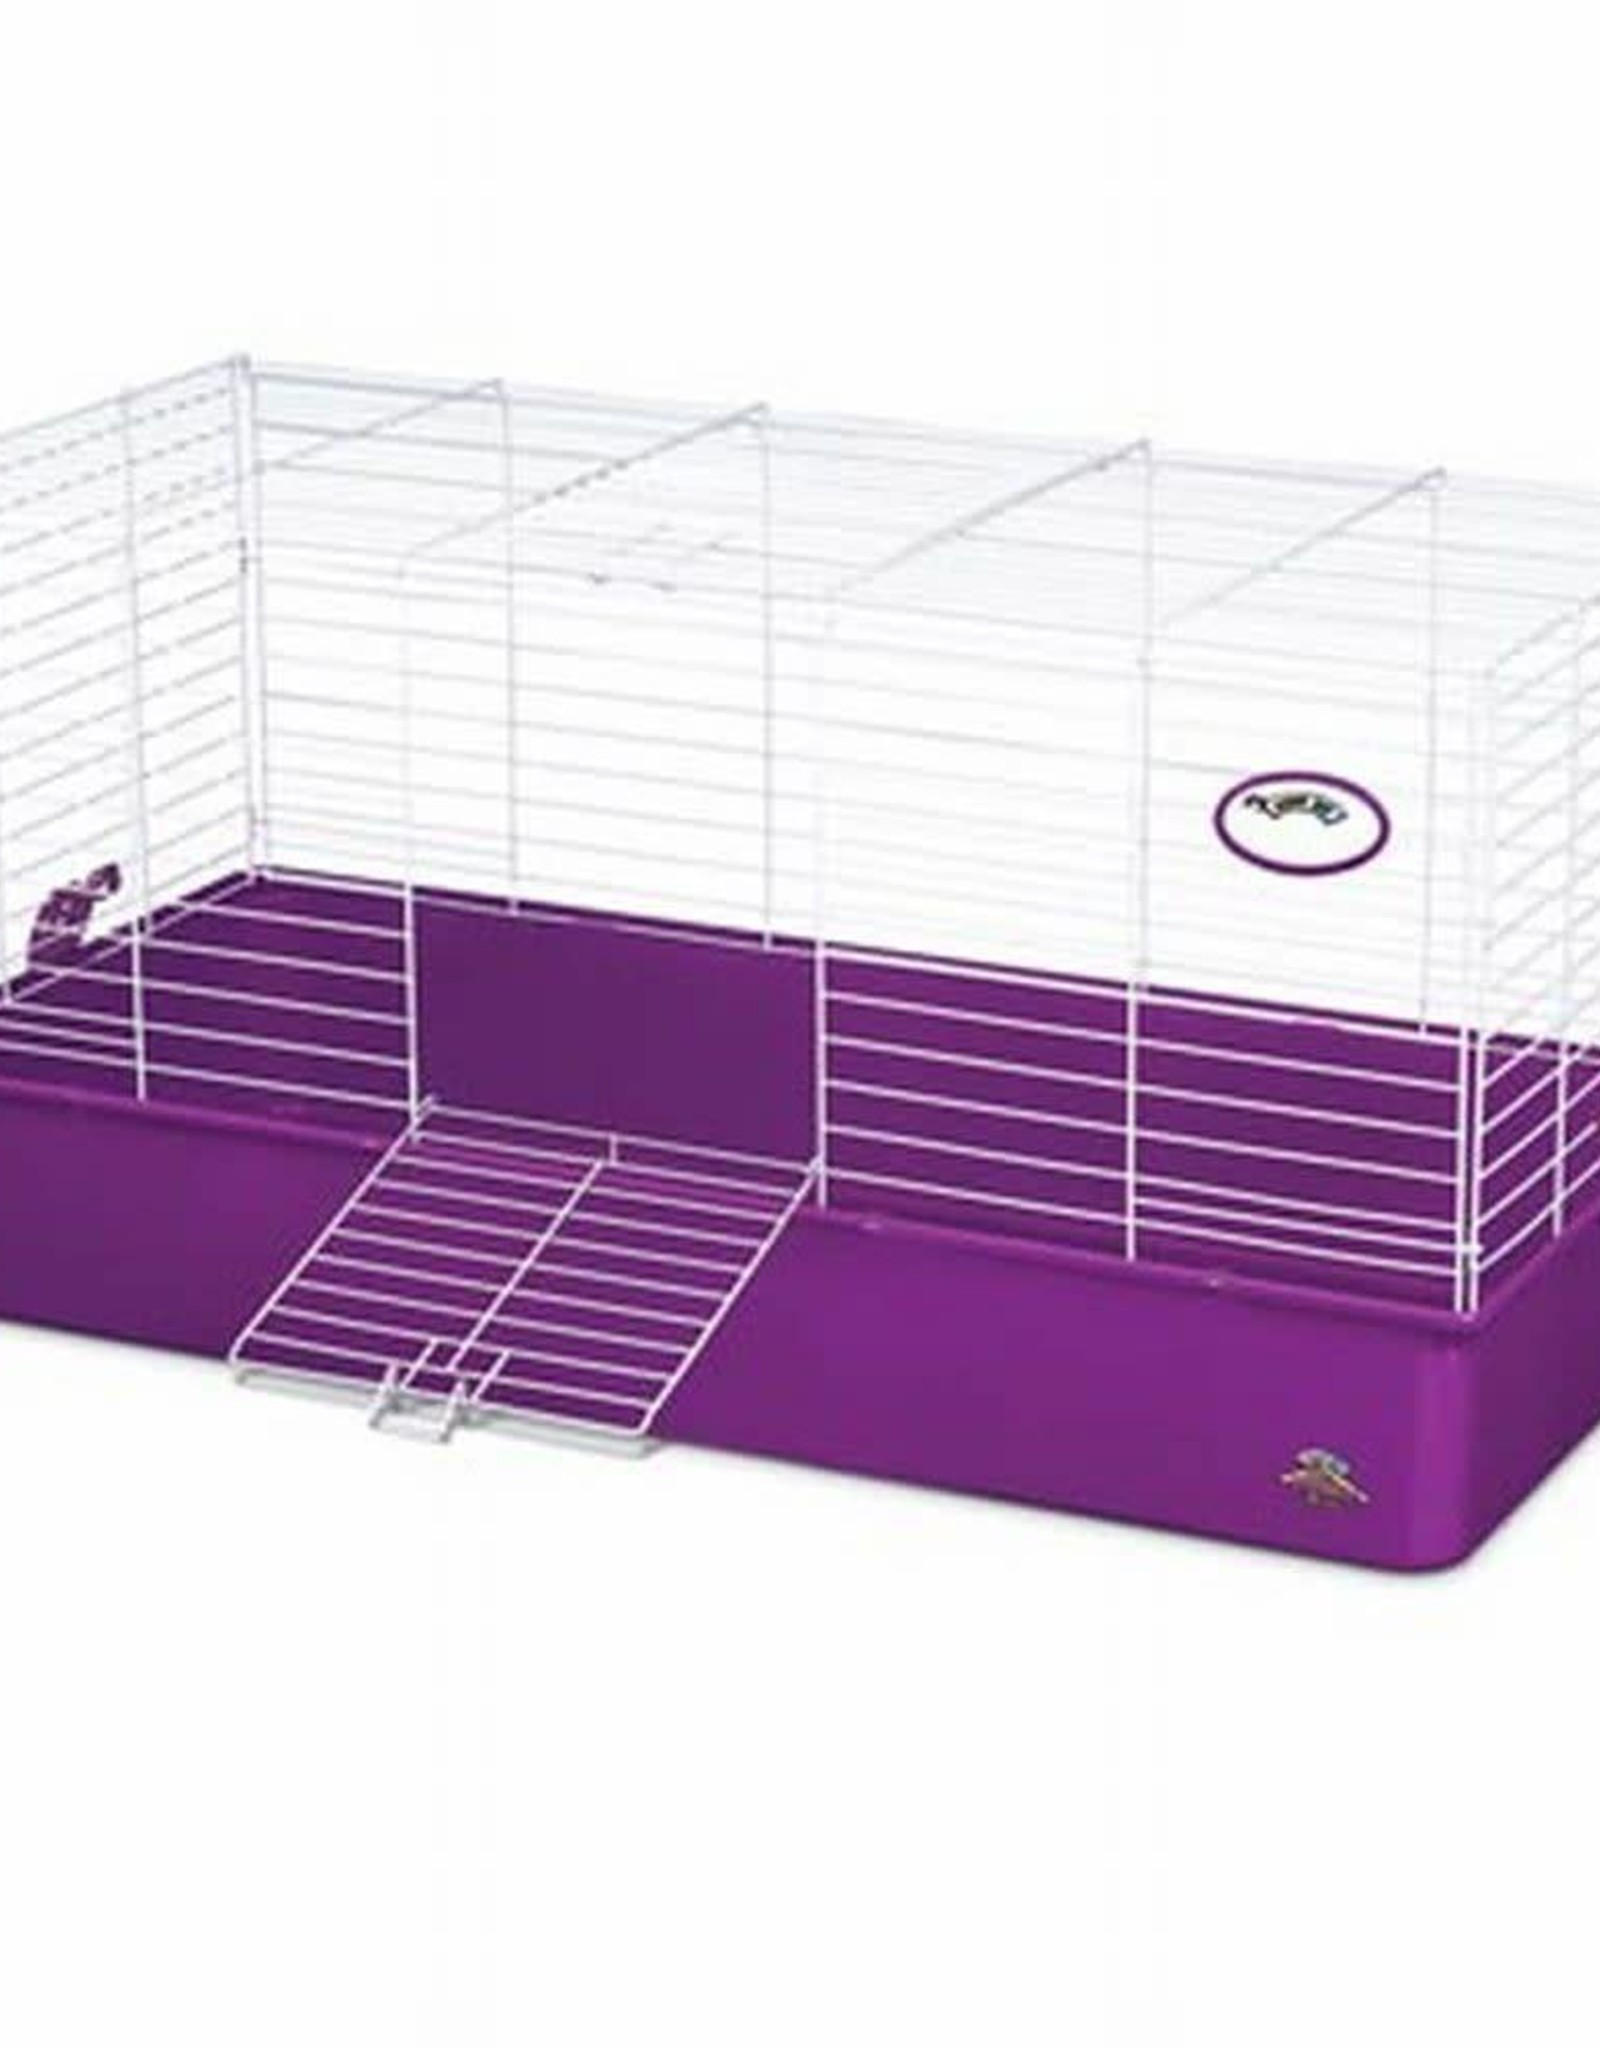 KAYTEE PRODUCTS Super Pet My first home Extra Large cage 40x18